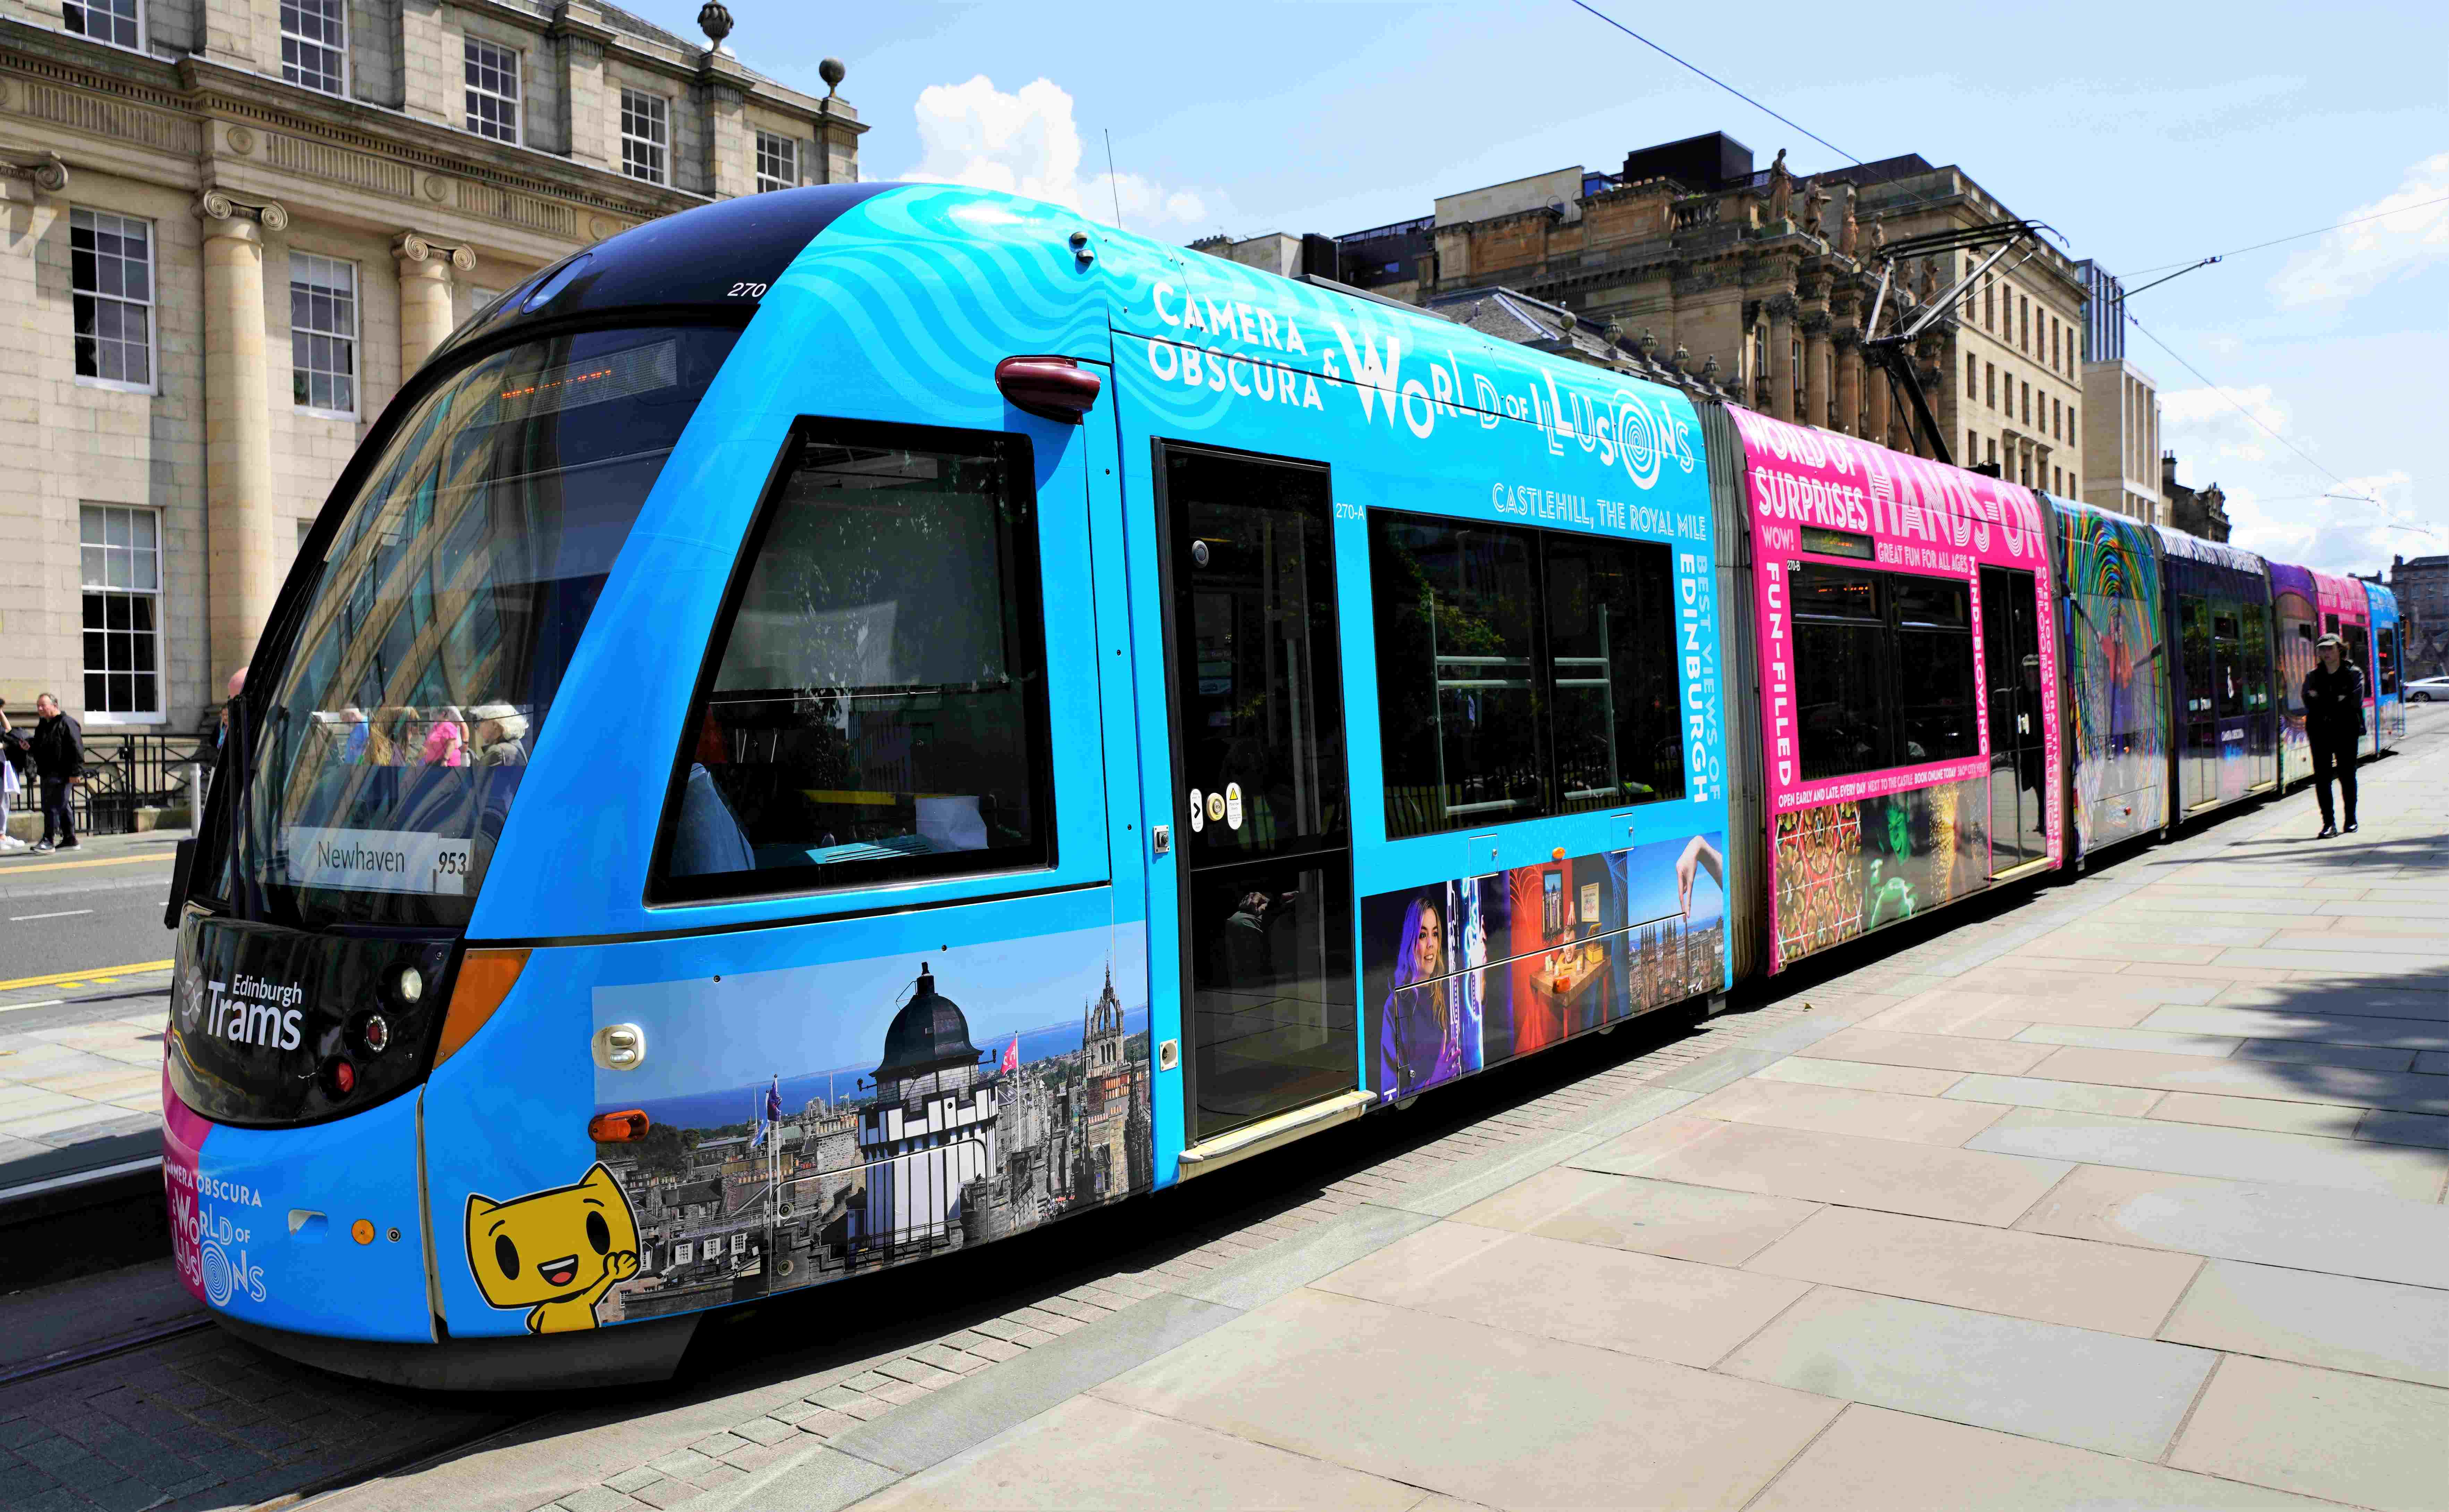 Edinburgh Tram with colourful Camera Obscura images